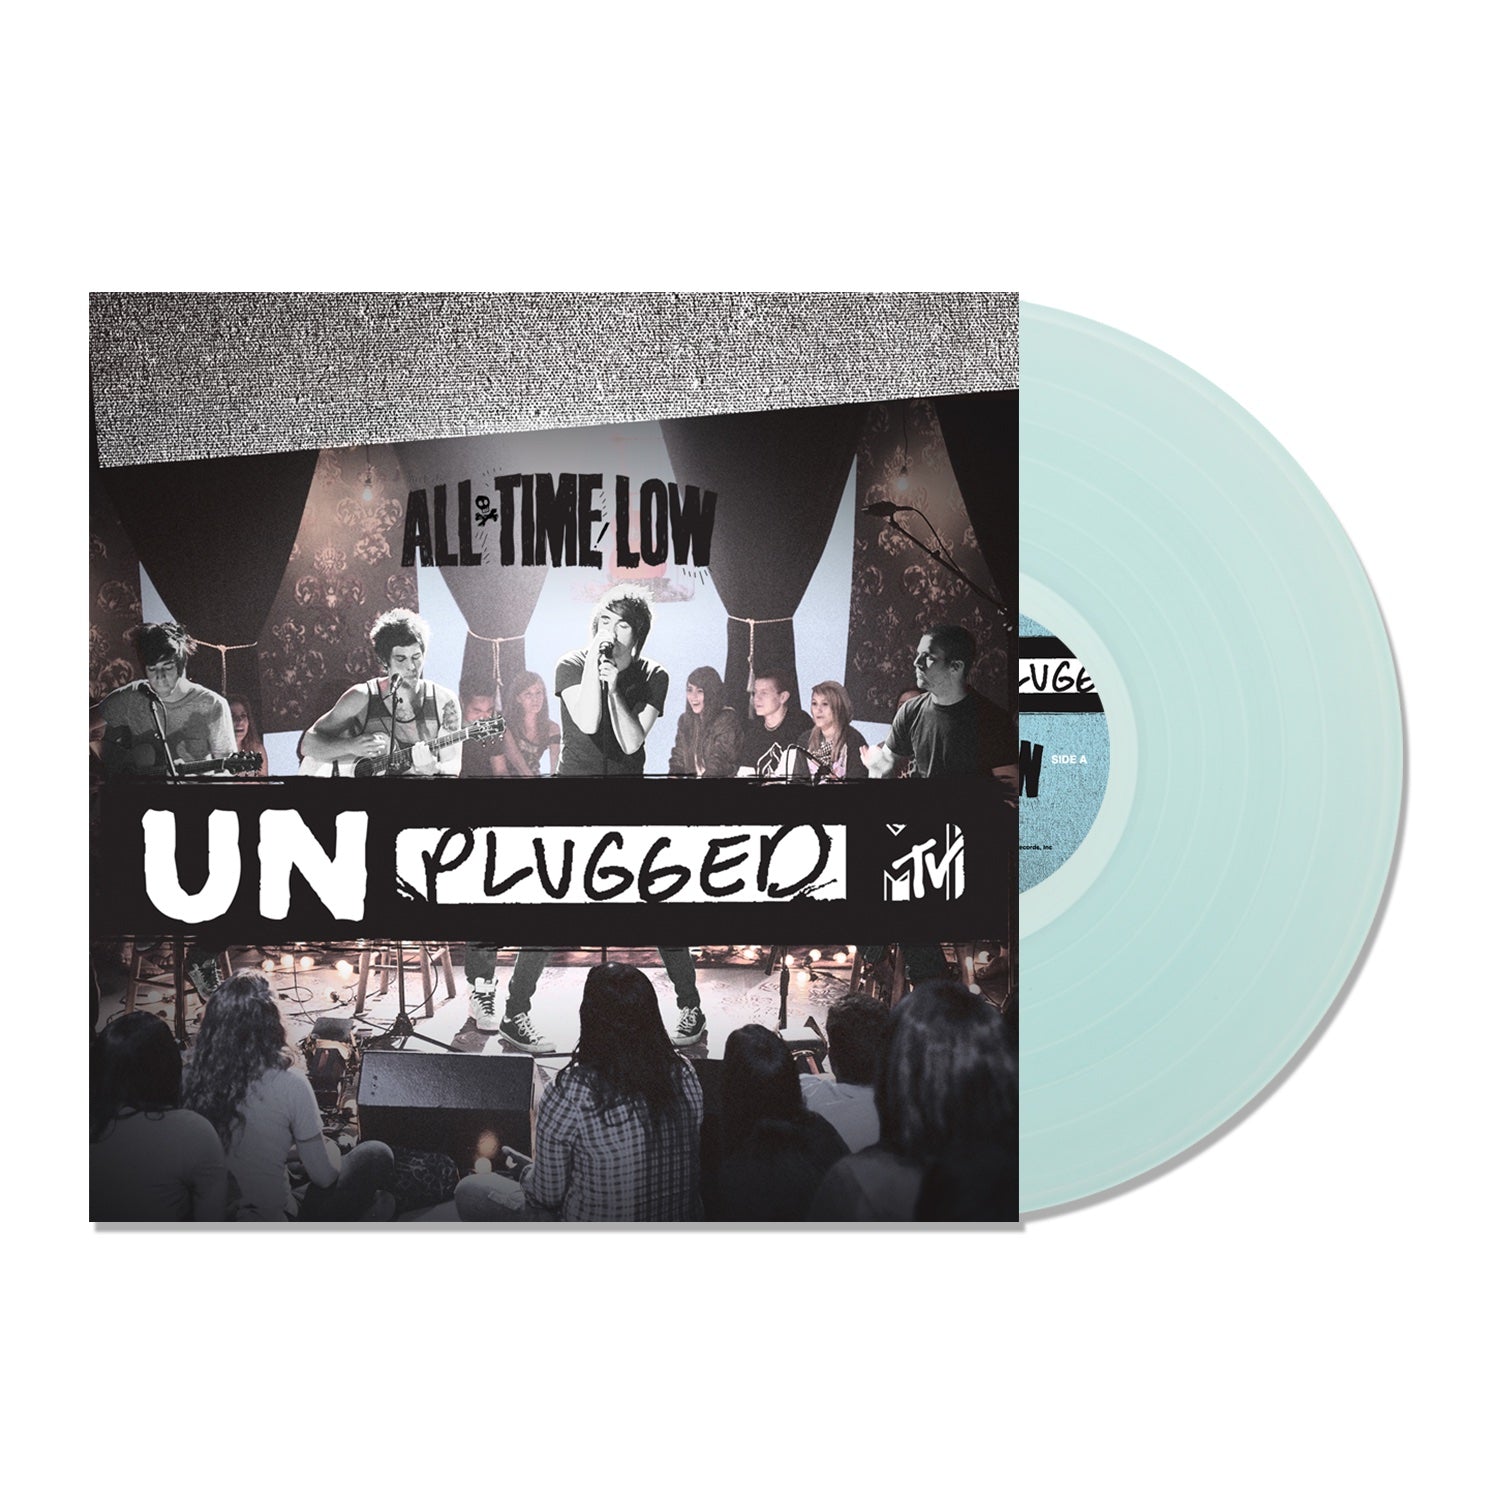 All Time Low - MTV Unplugged: Electric Blue Vinyl LP